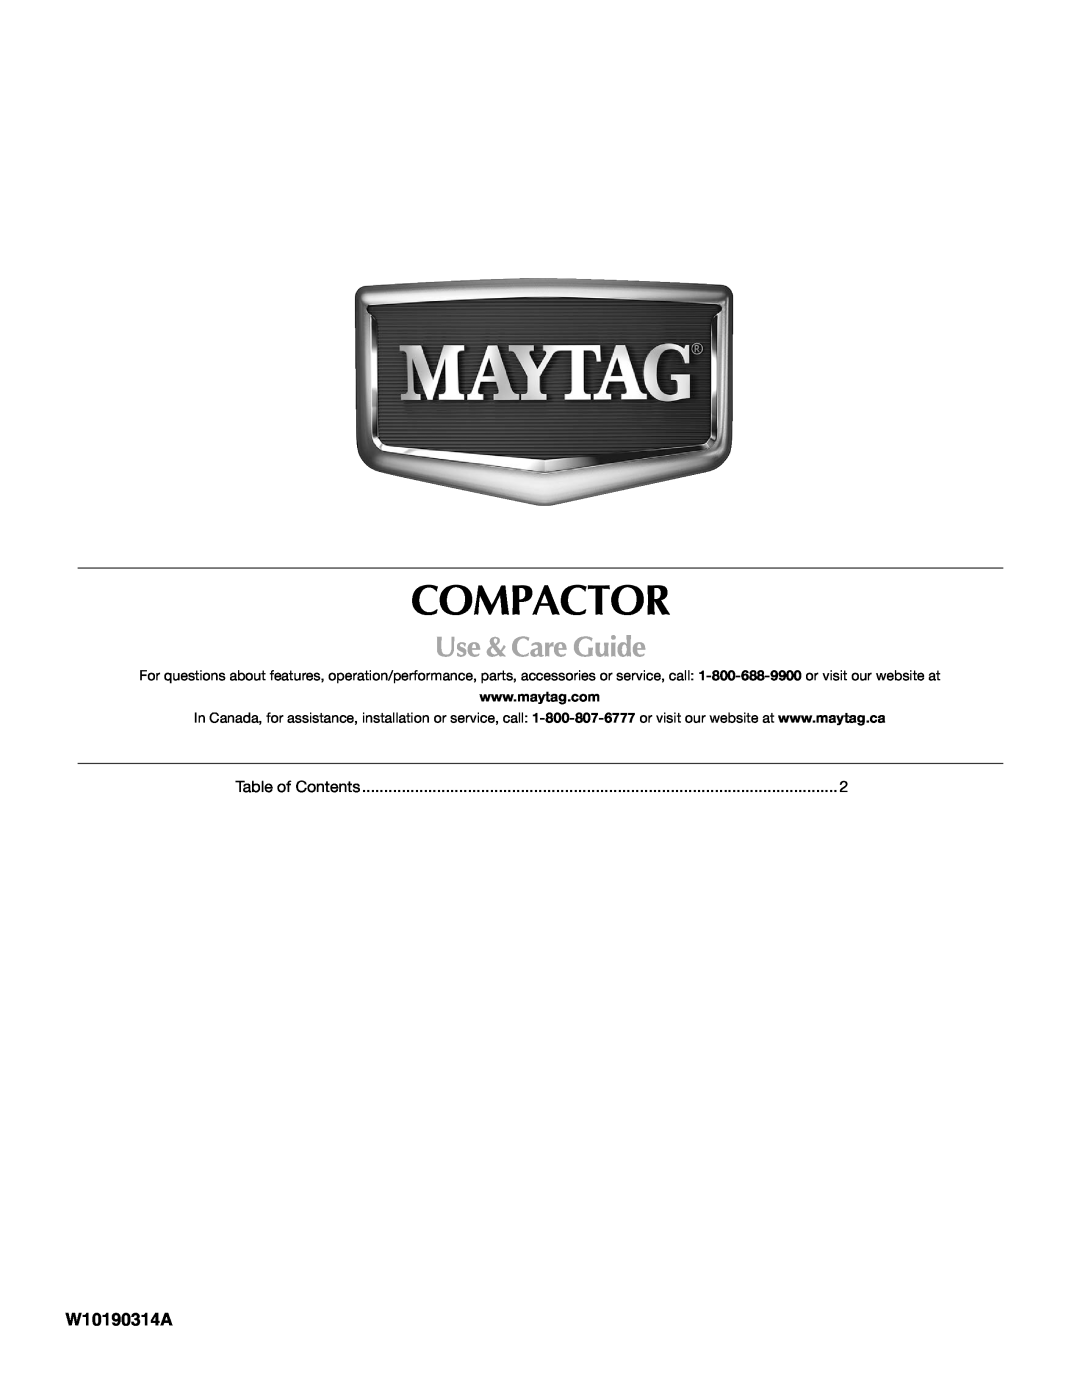 Maytag MTUC7000AWS manual Compactor, Use & Care Guide, W10190314A 